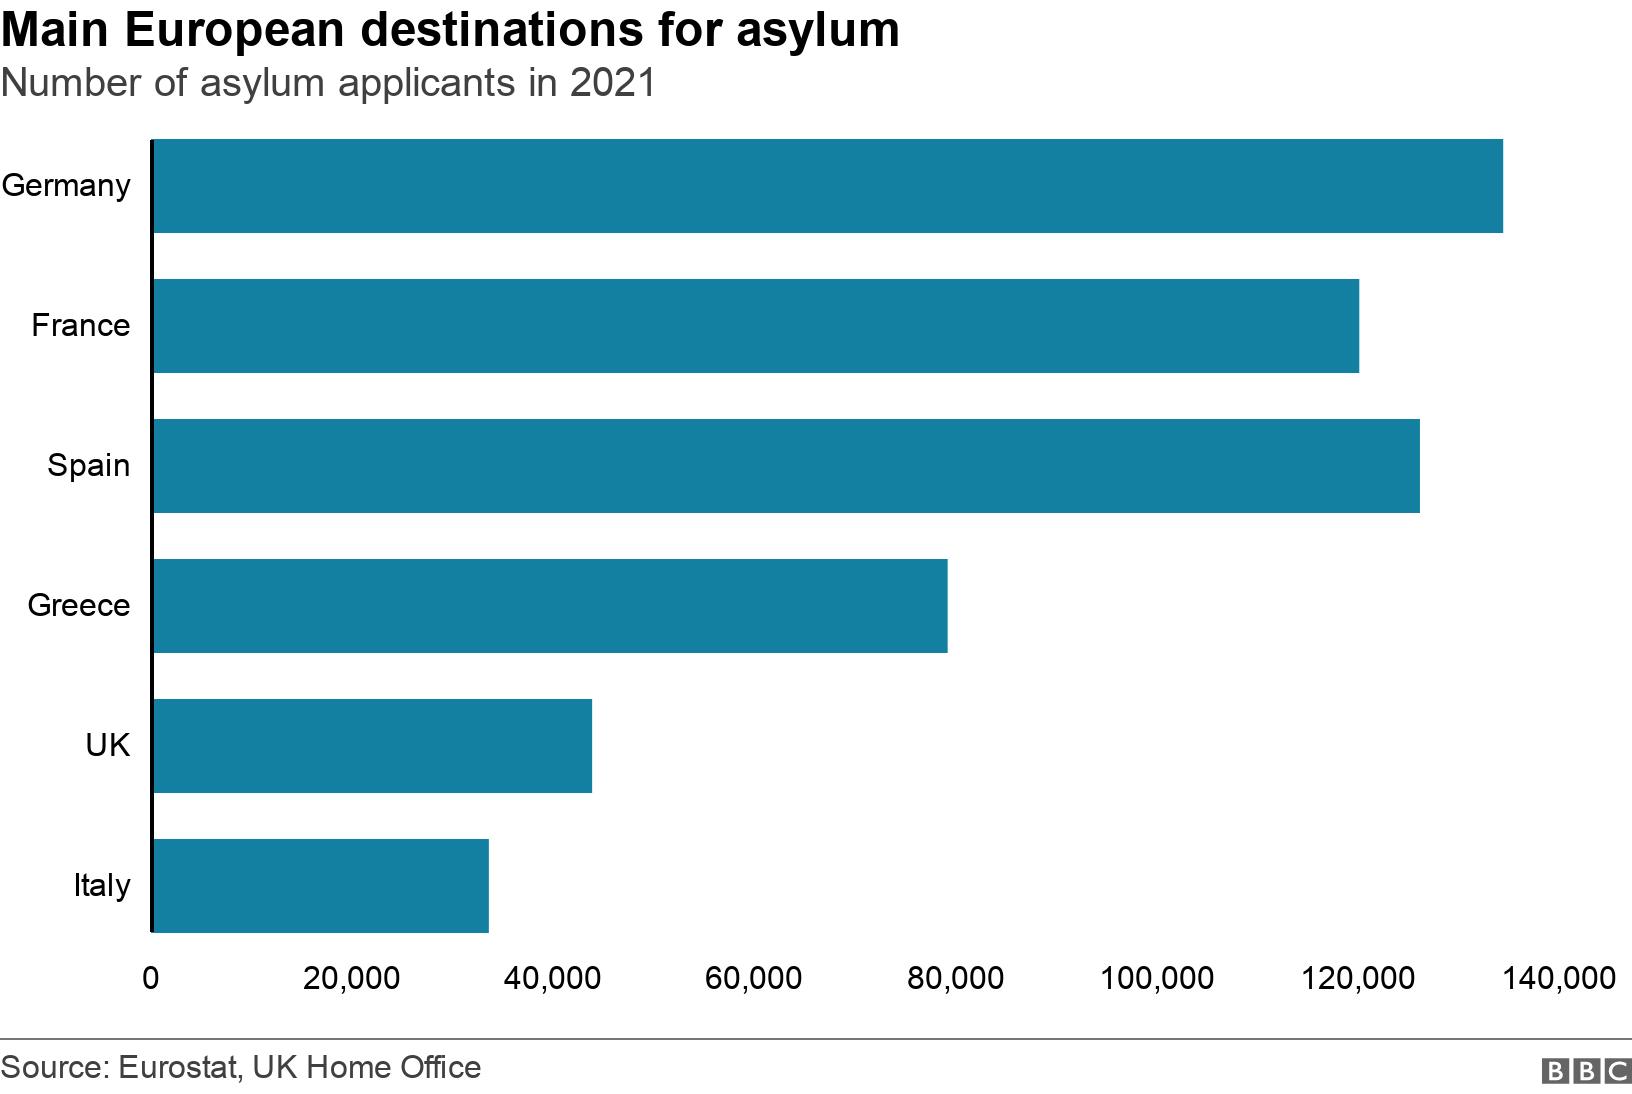 Main European destinations for asylum. Number of asylum applicants in 2021. Germany had the most asylum applicants in Europe in 2020 - more than 100,000. The UK was fifth after France, Spain and Greece with around 40,000. .